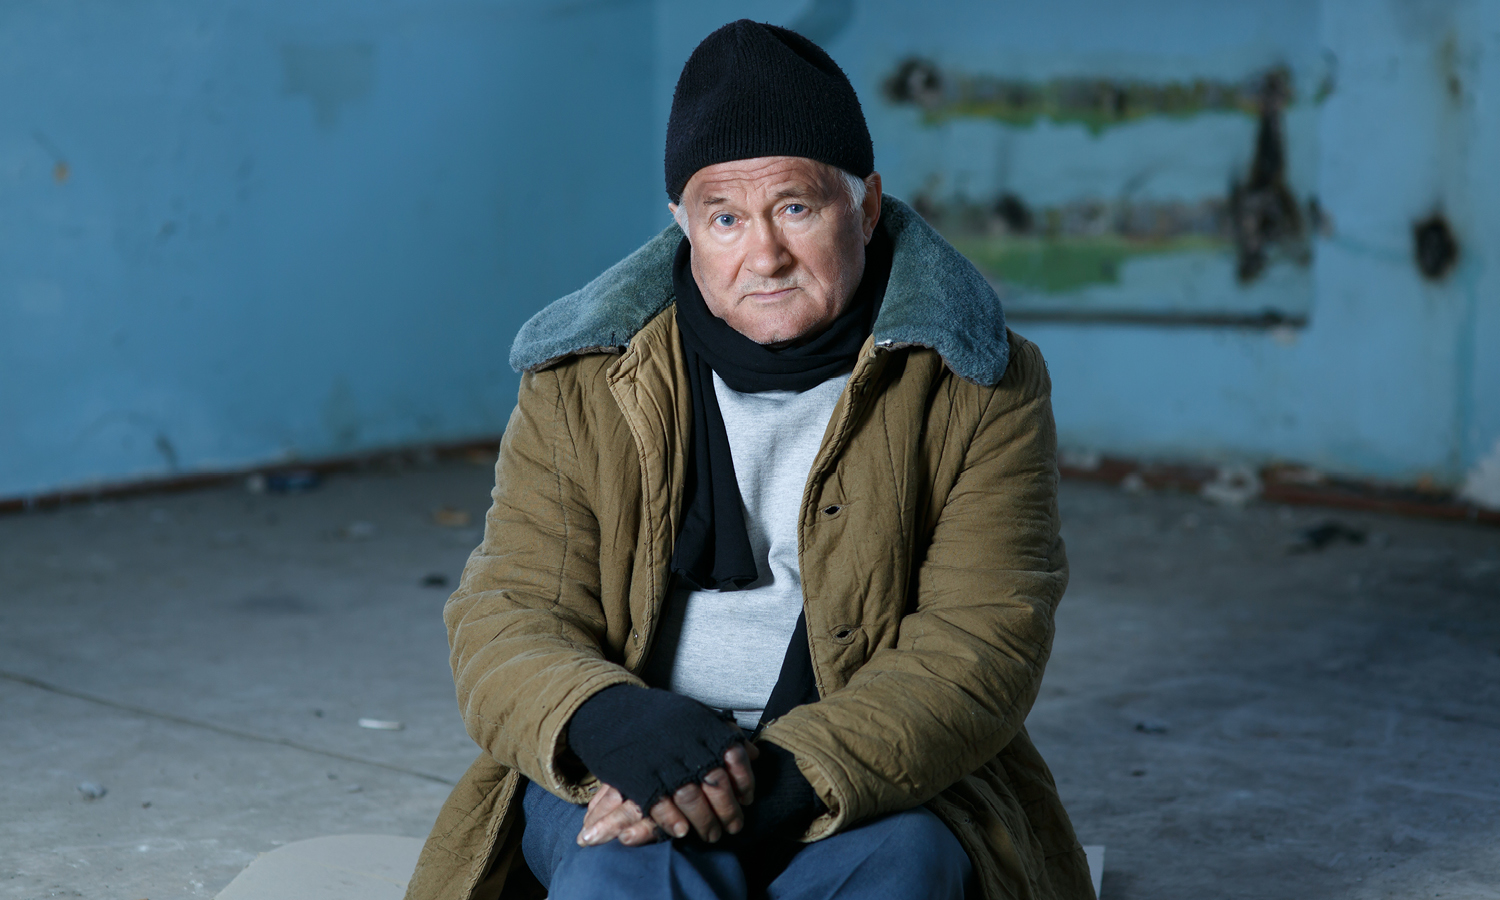 An older man sits bundled up in a dilapidated space, looking cold and in need of assistance. 